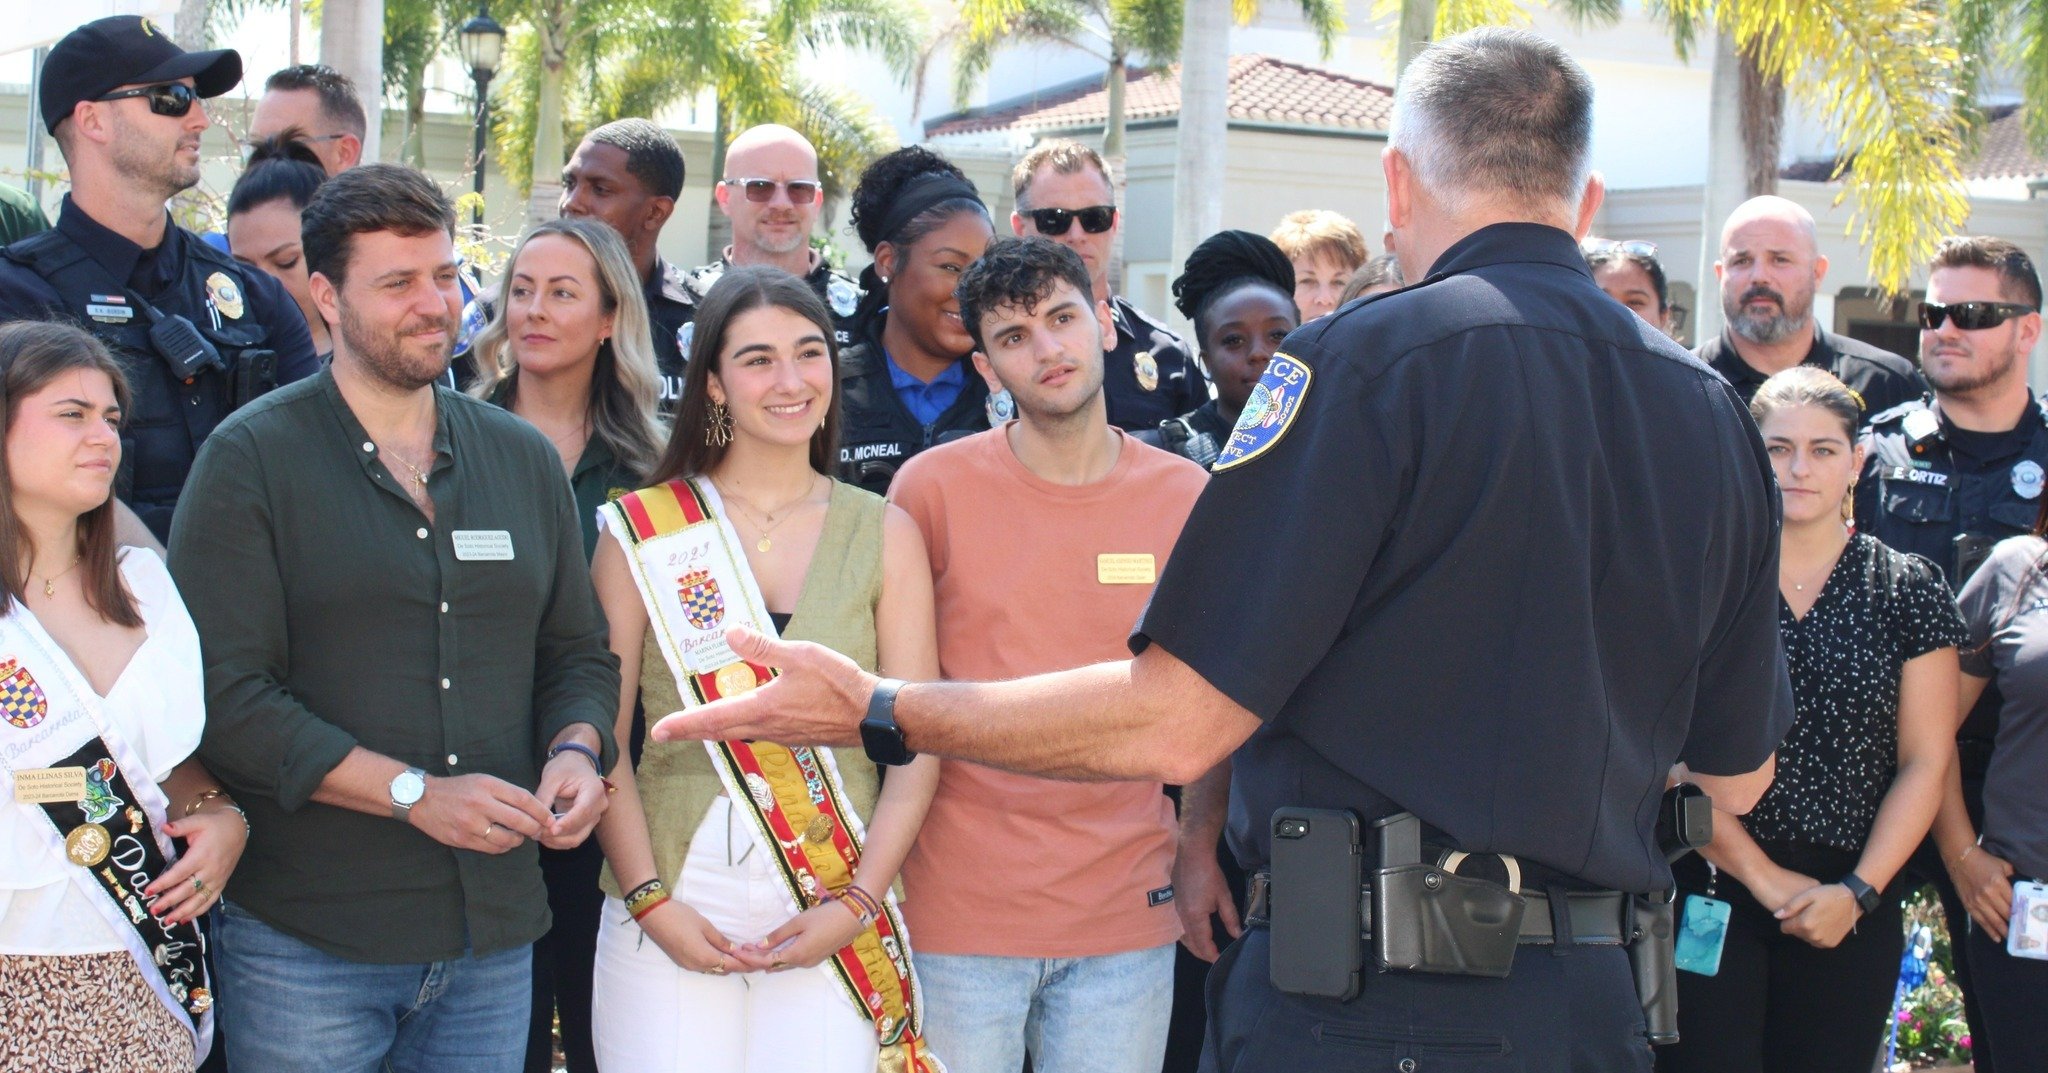 &iexcl;Bienvenidos! Dignitaries and guests from Bradenton's sister city, Barcarrota, Spain, visited with BPD officers and civilian staff as they tour #TheFriendlyCity. For almost four decades, delegates from Barcarrota have traveled to Bradenton each